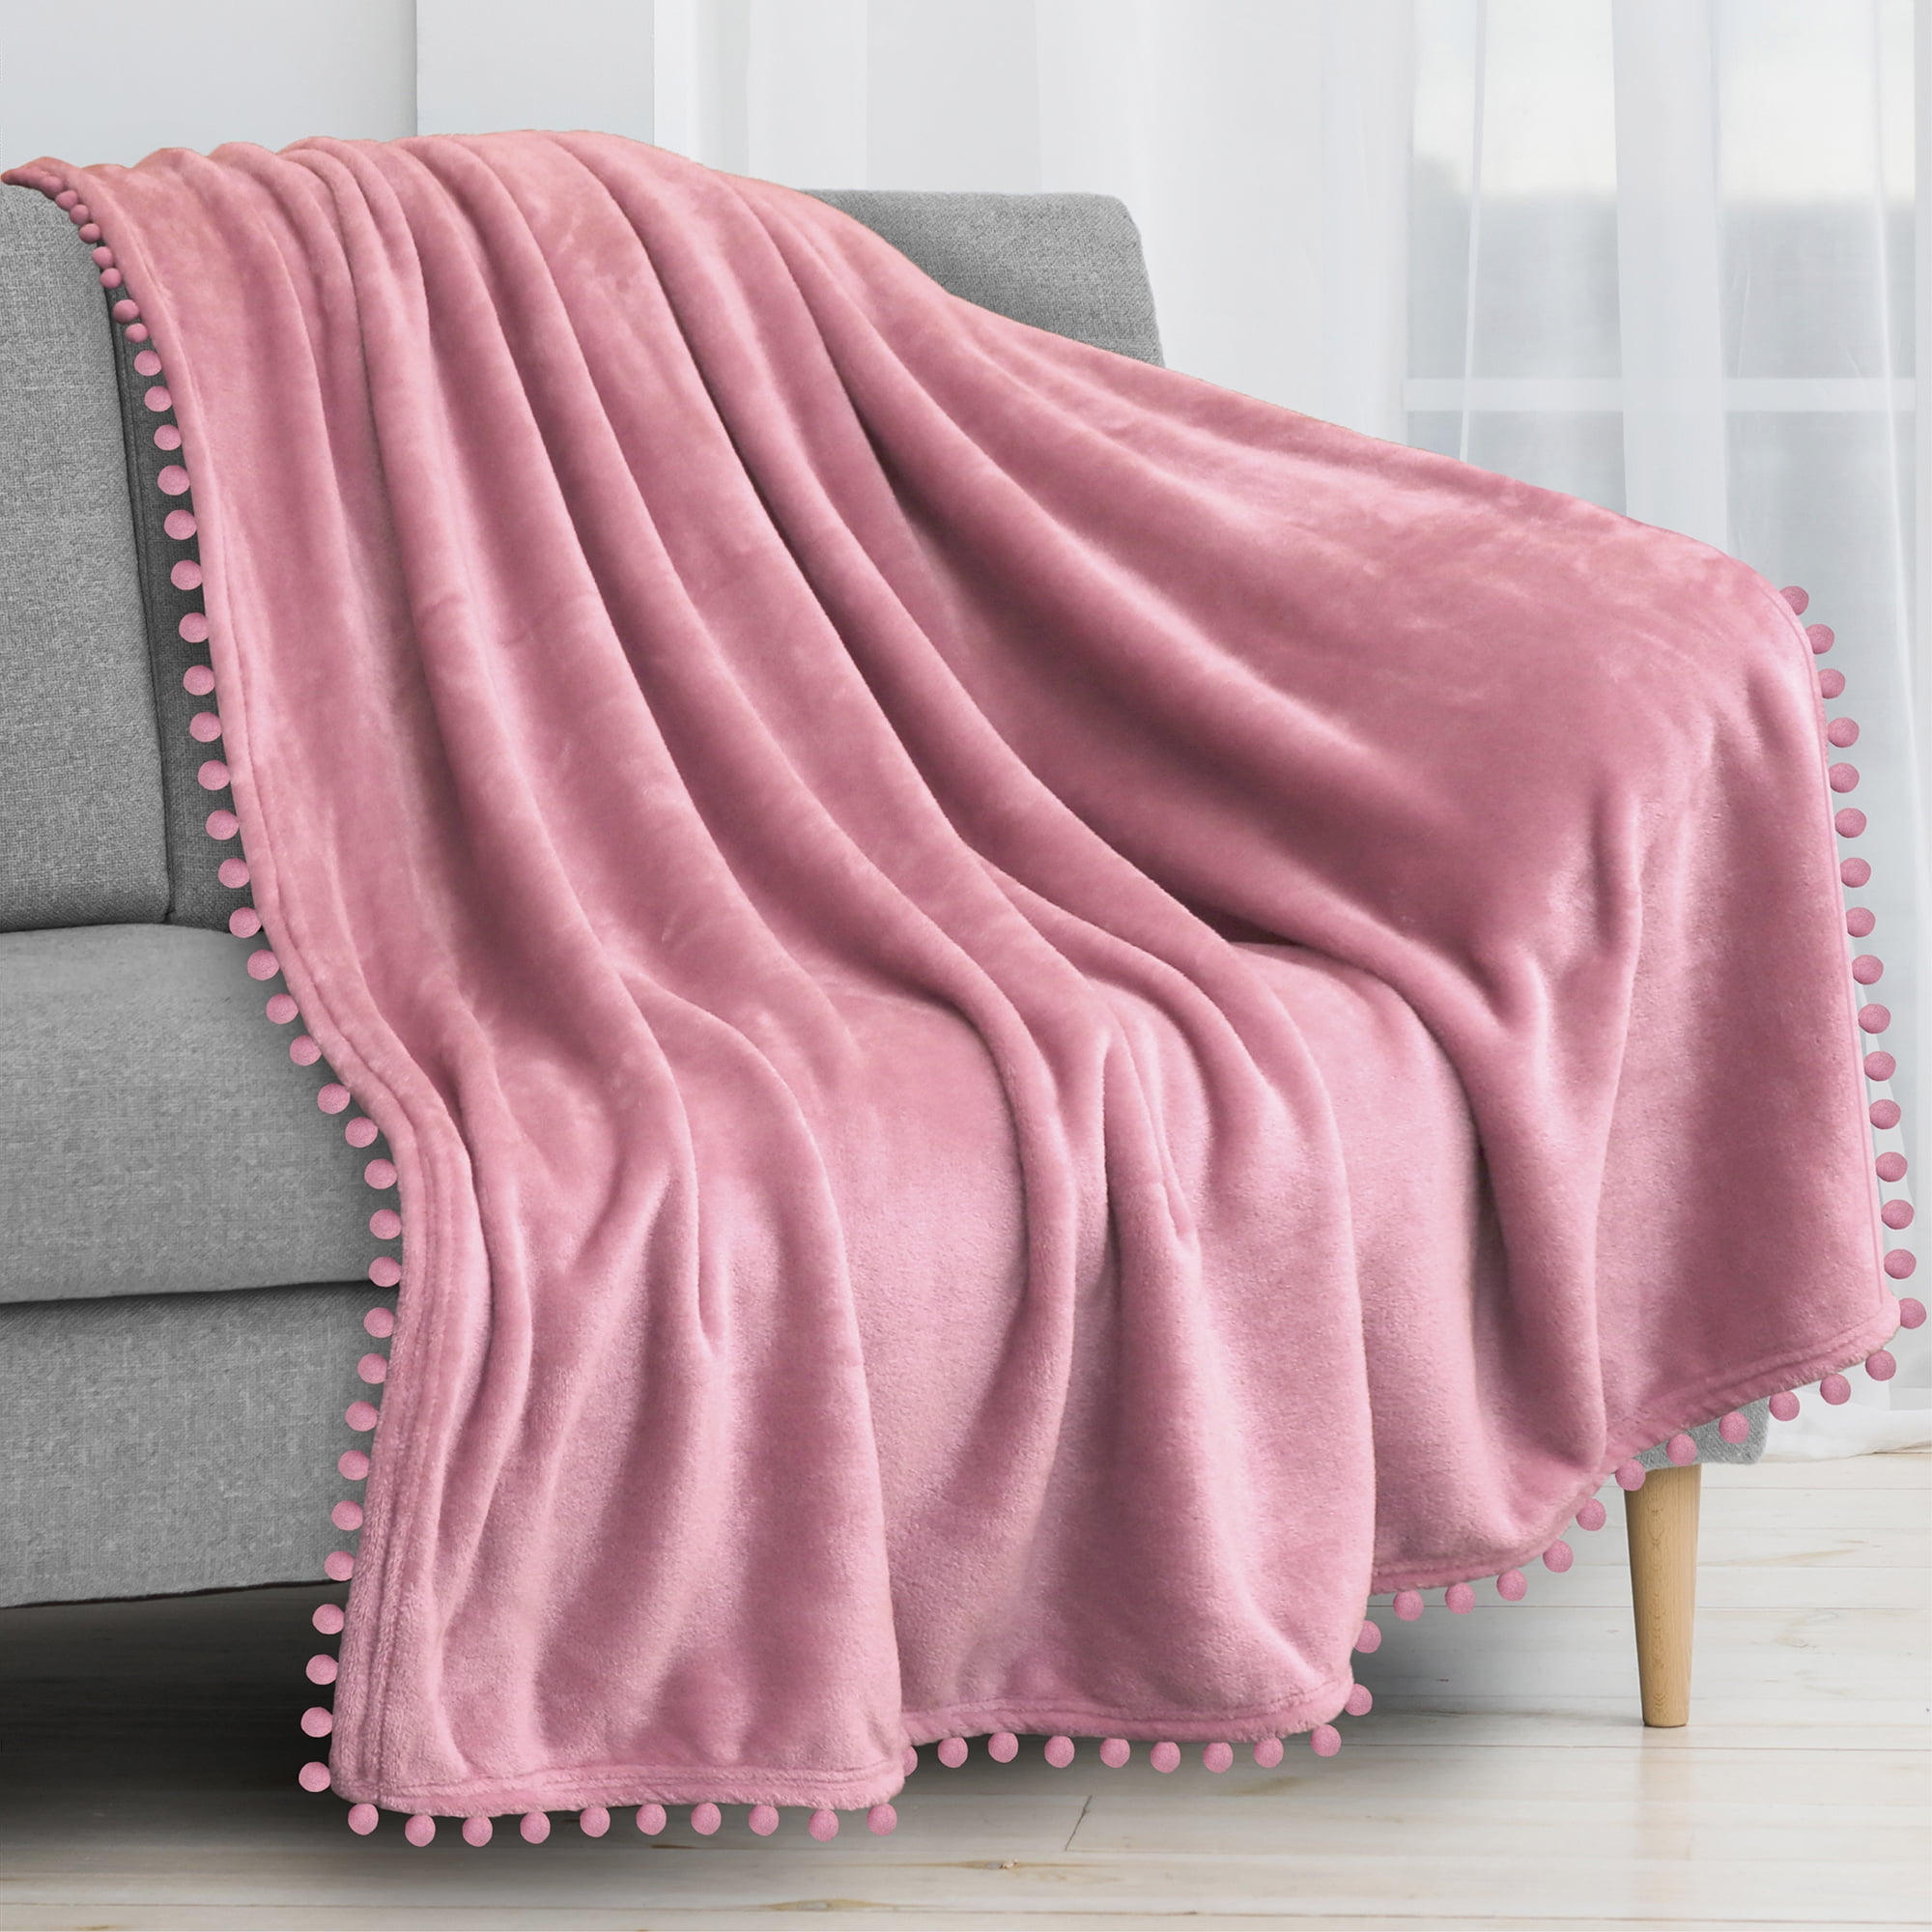 Lightweight Decorative Throw Blanket for Sofa Bed Chair All Season Soft & Cozy Flannel Light Pink Throw Blanket Blush Pink, 50 x 60 Inch Homiest Fleece Throw Blanket with Fringe